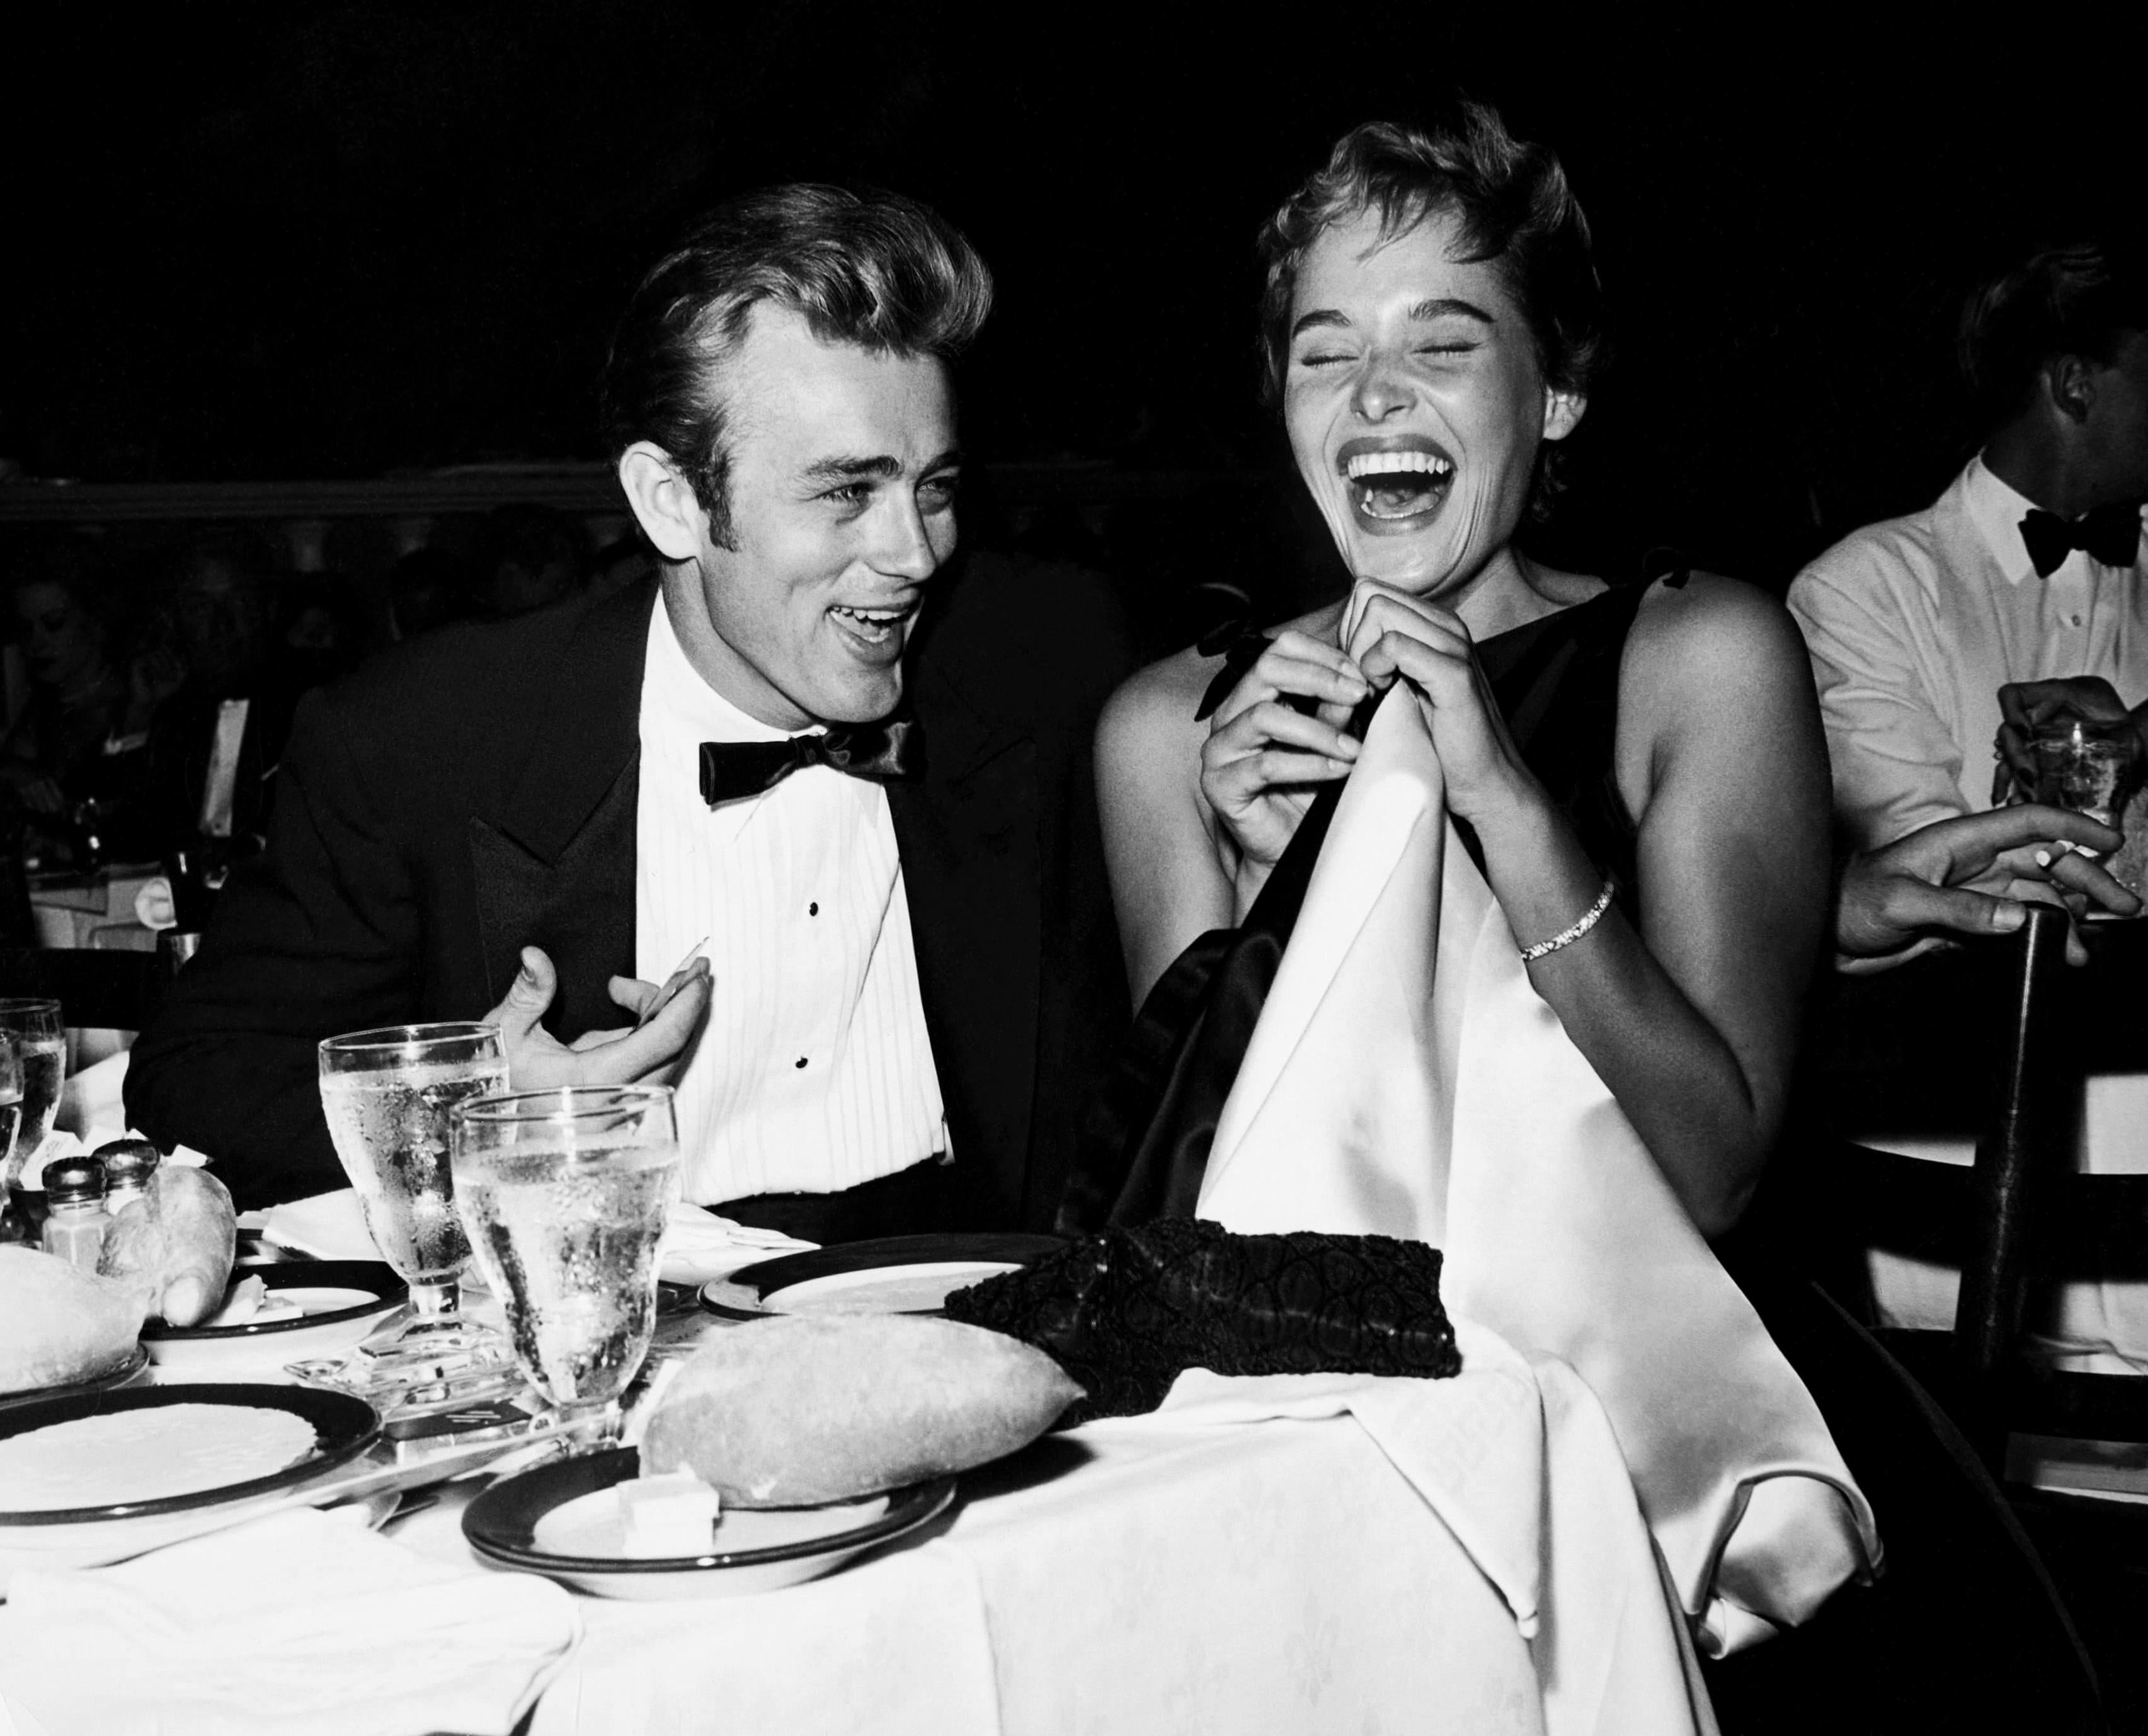 Unknown Black and White Photograph - James Dean and Ursula Andress Laughing at Dinner Globe Photos Fine Art Print